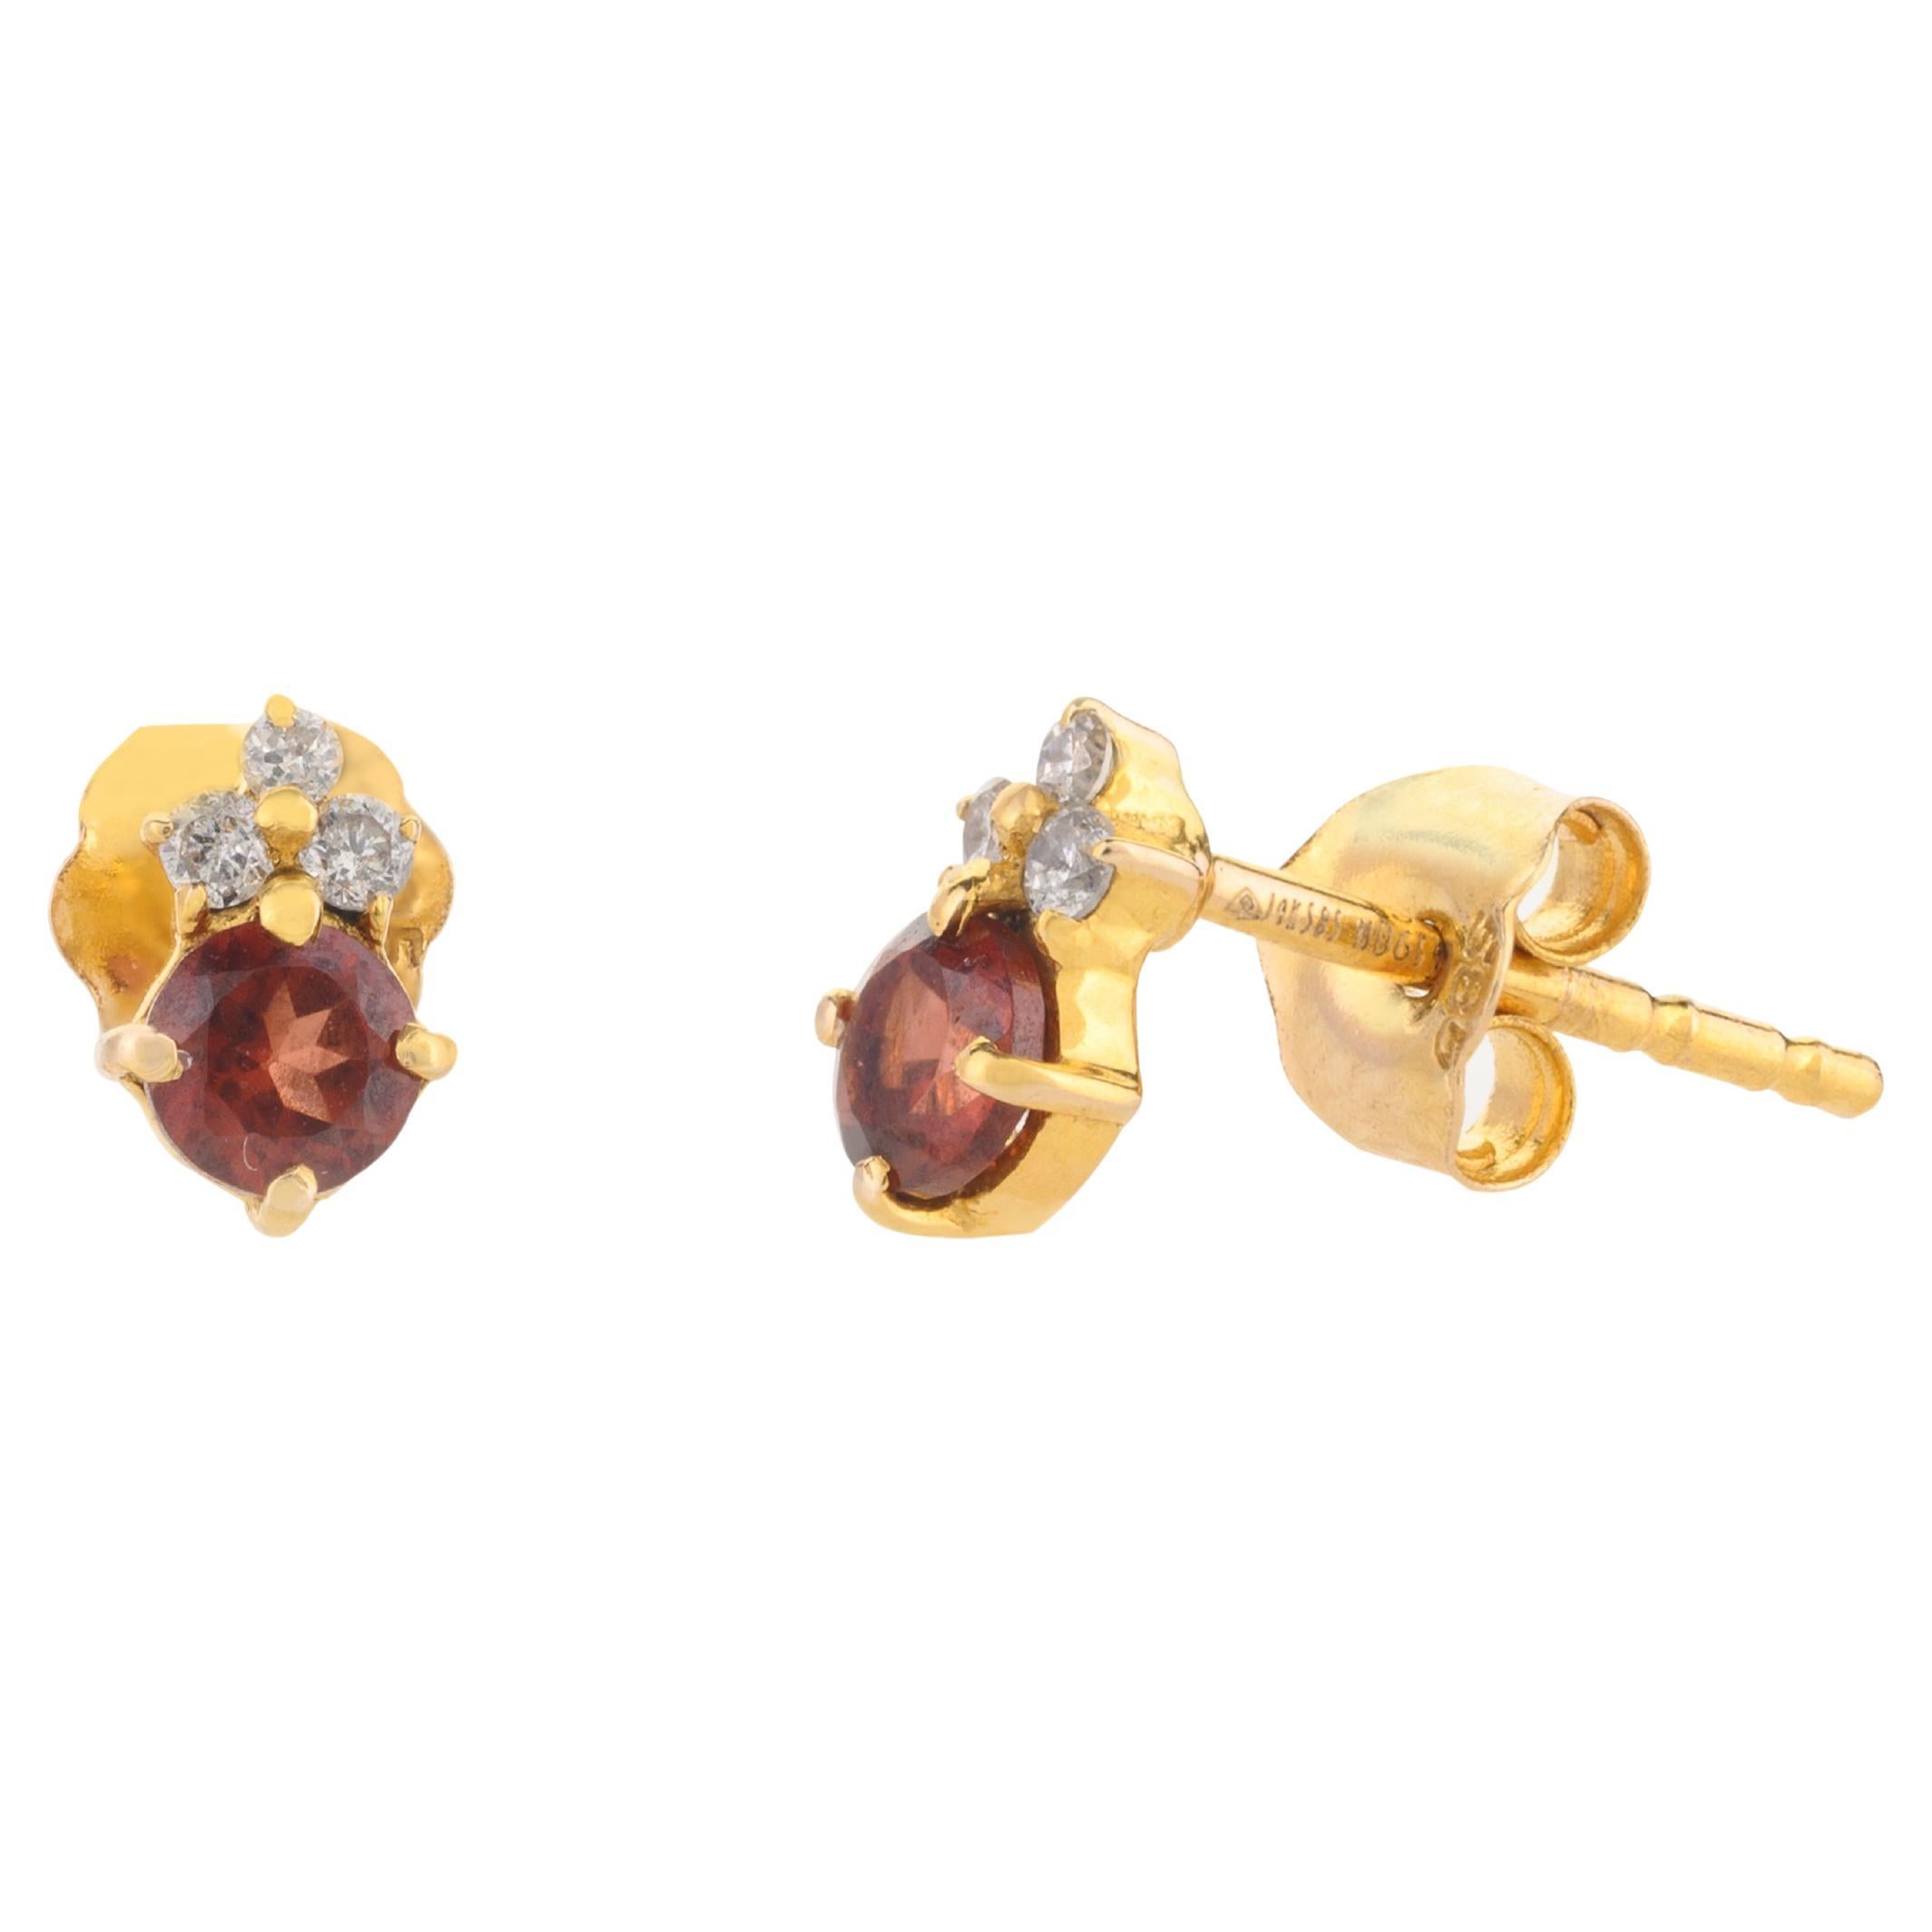 Dainty Garnet and Diamond Pushback Stud Earrings 14k Solid Yellow Gold for Her